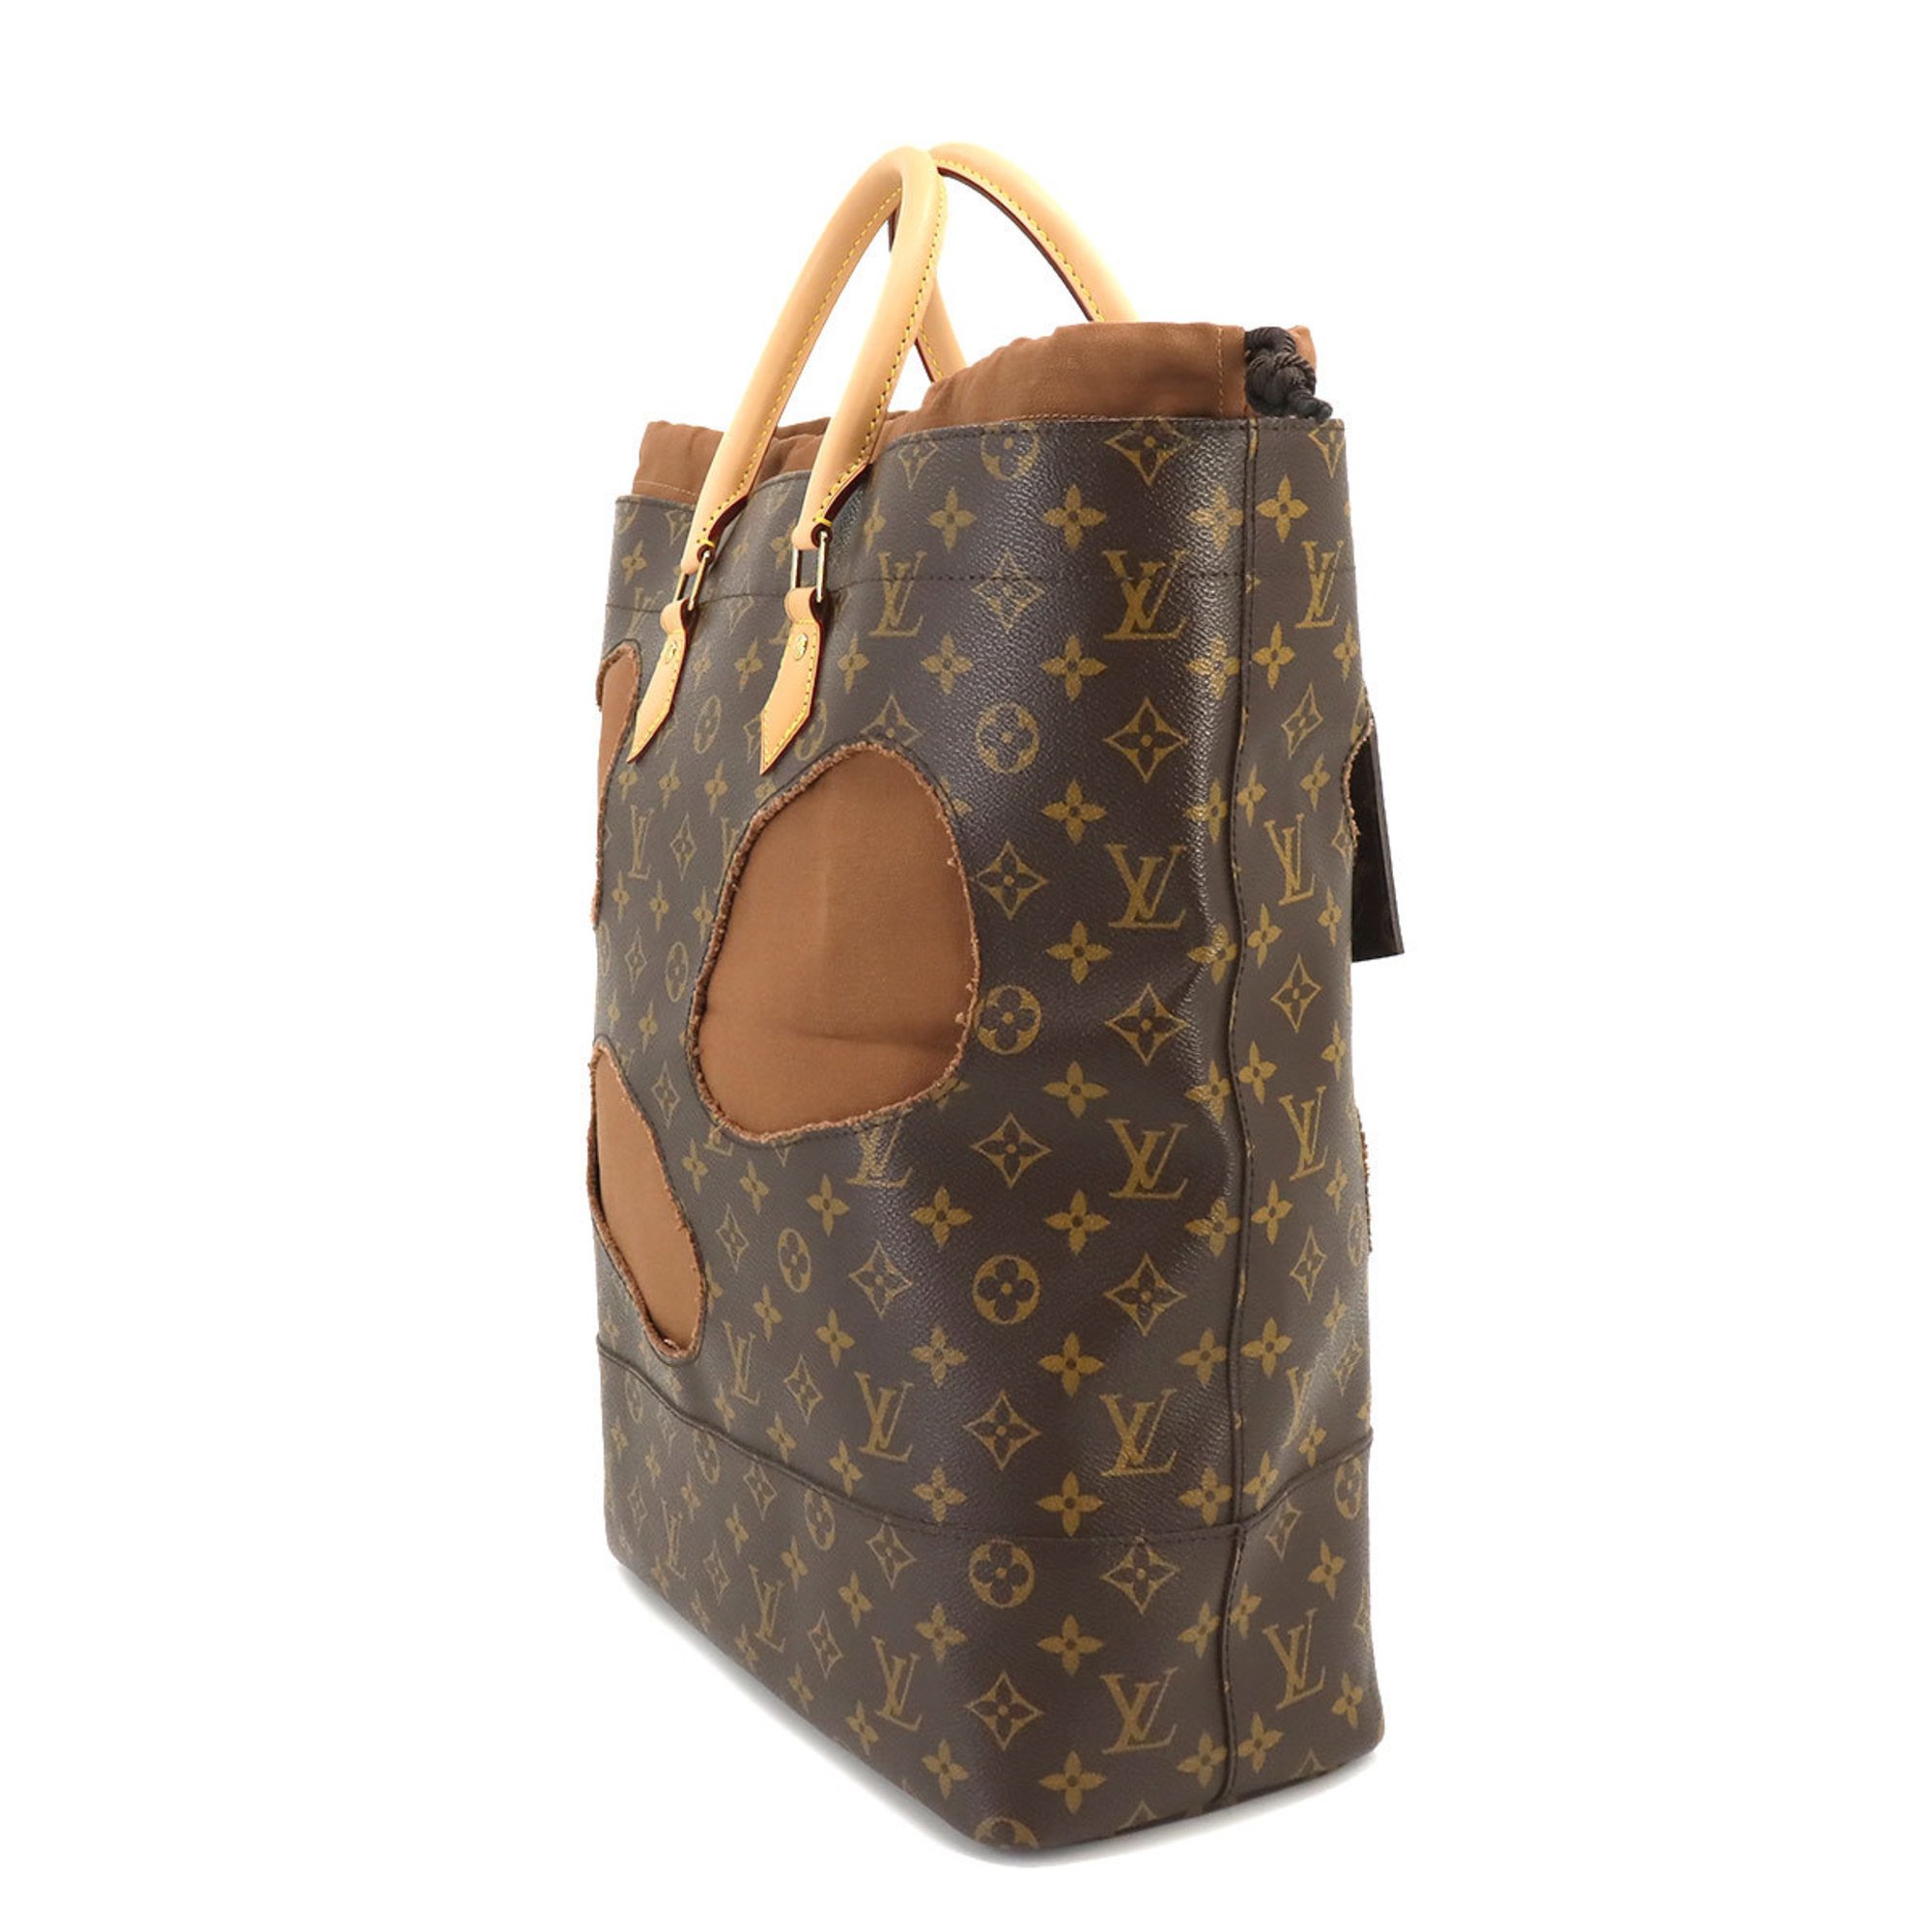 LOUIS VUITTON Monogram with Holes Tote Bag M40279 Limited Comme 